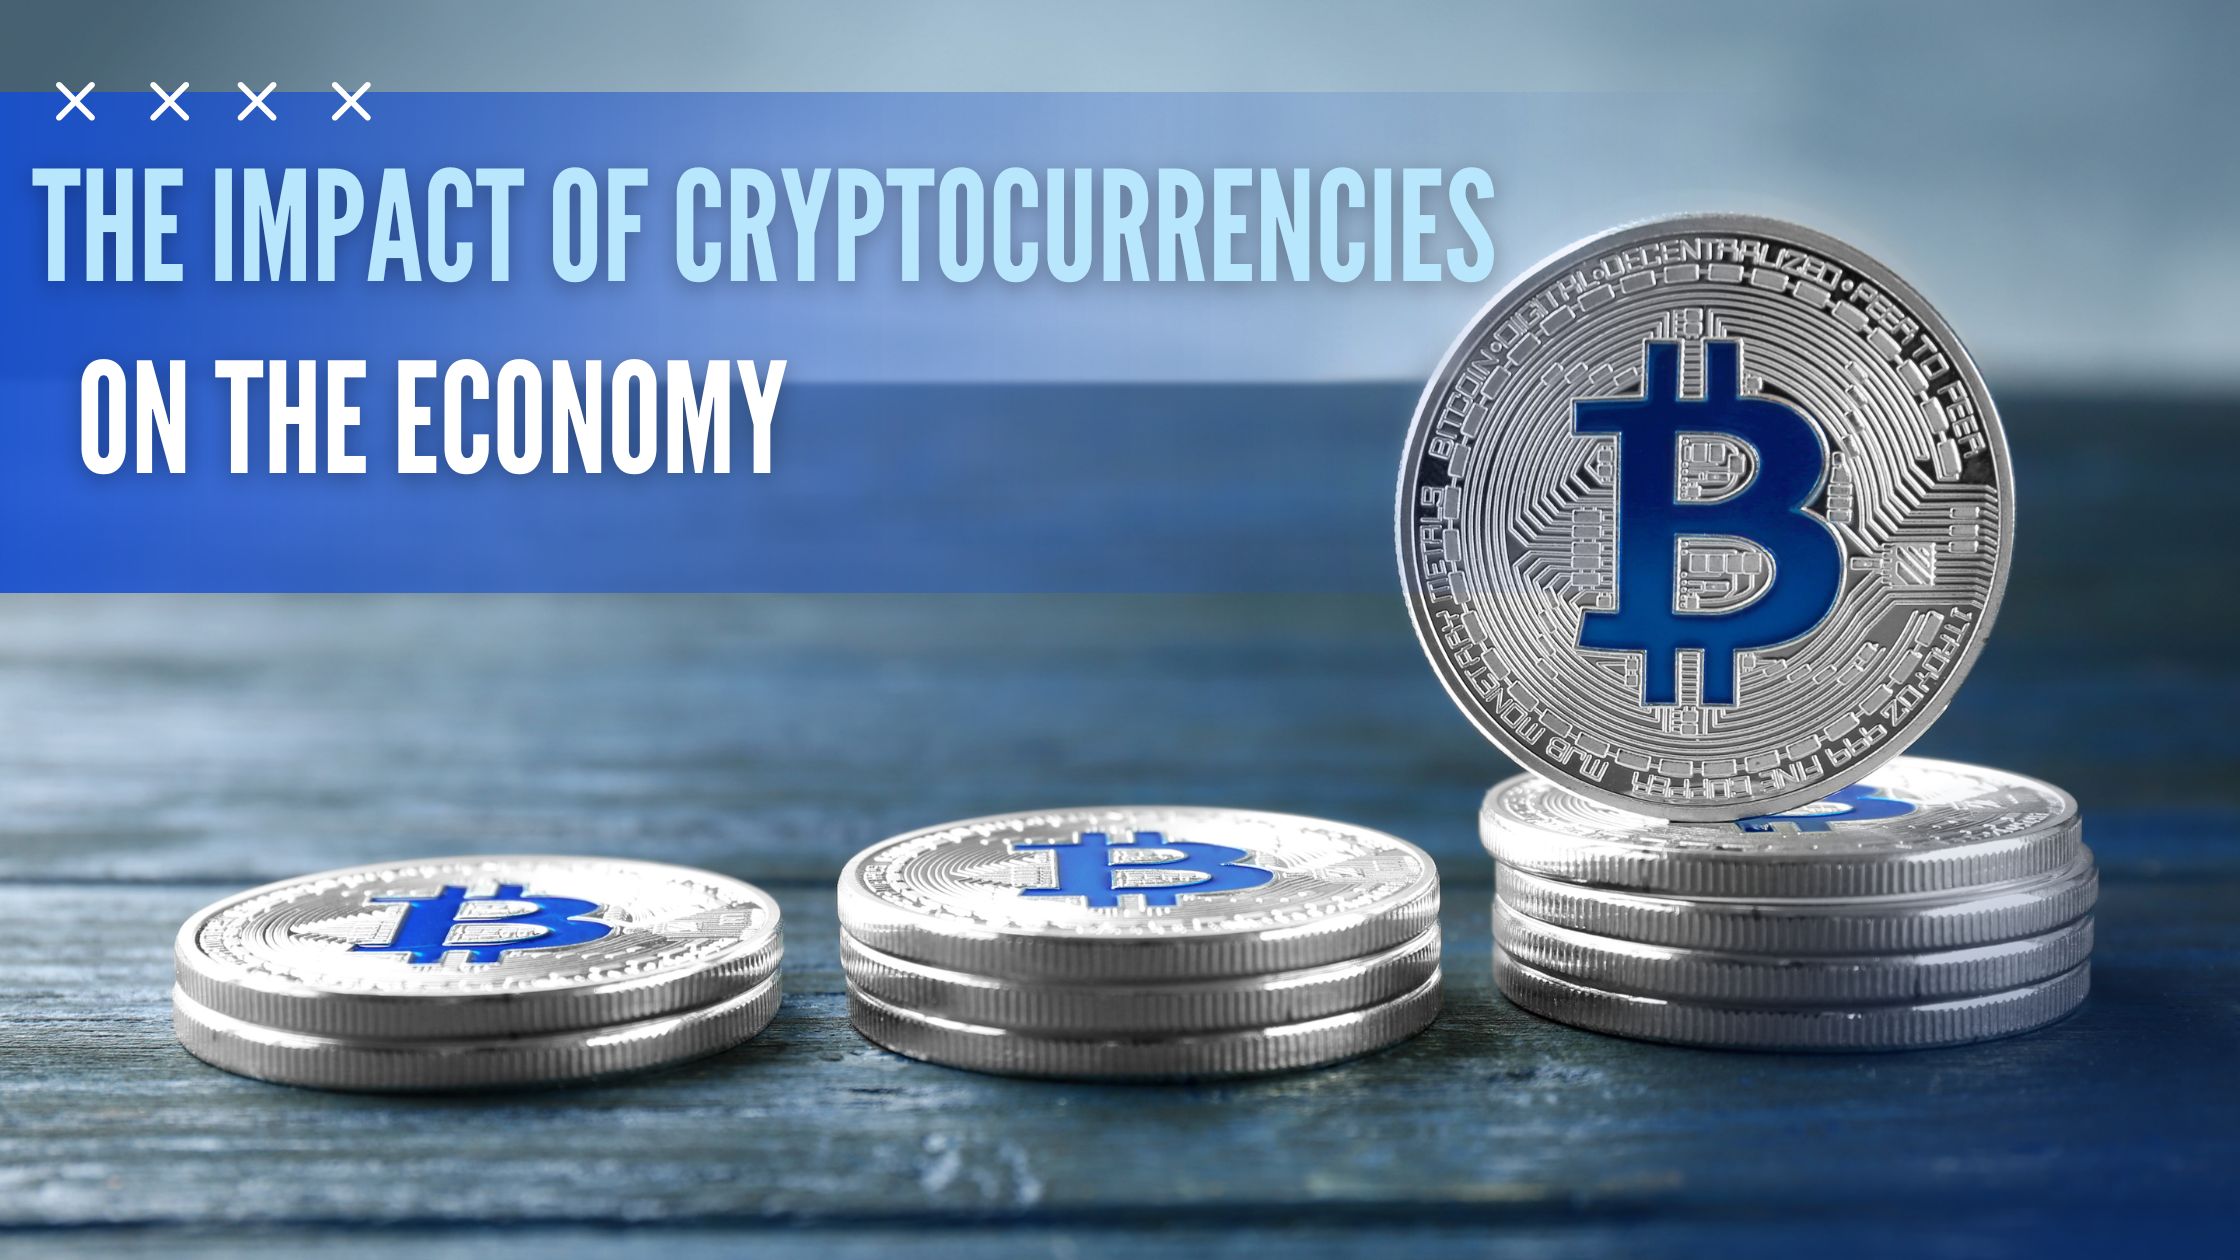 The impact of cryptocurrency on the economy